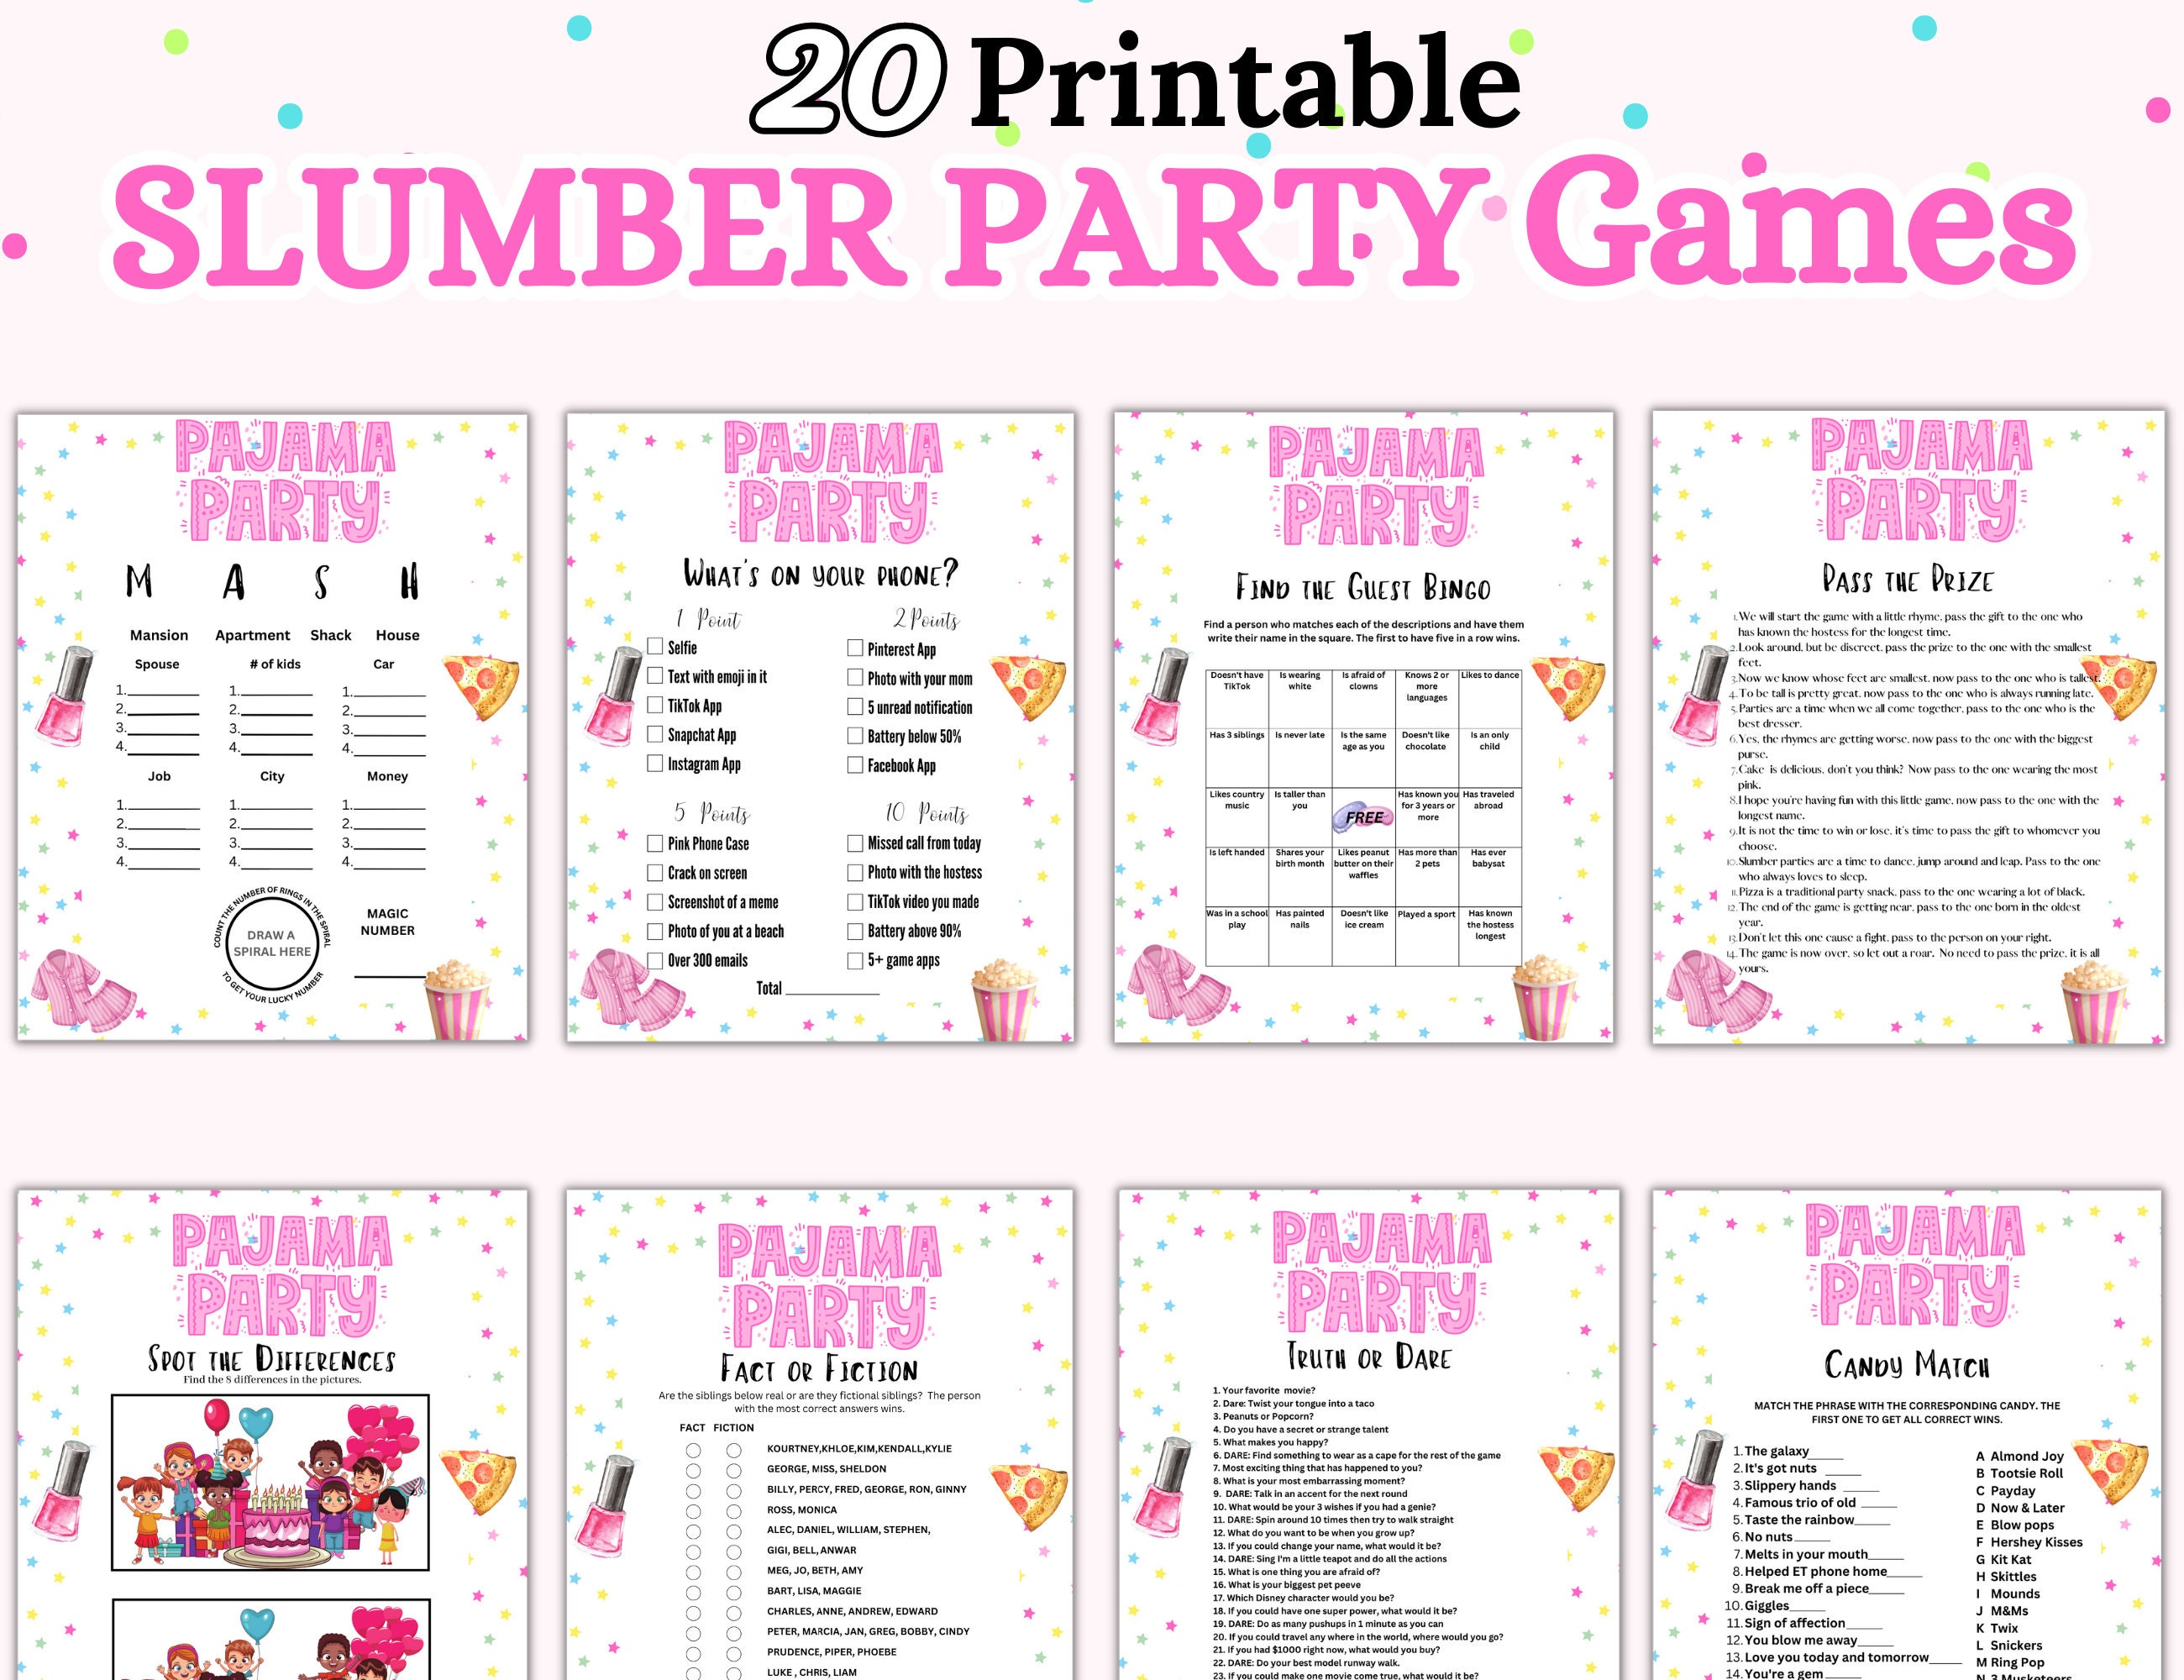 Fun Teen Girls Birthday Games What's on Your Phone Girls Sleepover Party  Games Pajama Party Age 12, 13, 14,15,16,17 Tween,sweet 16 